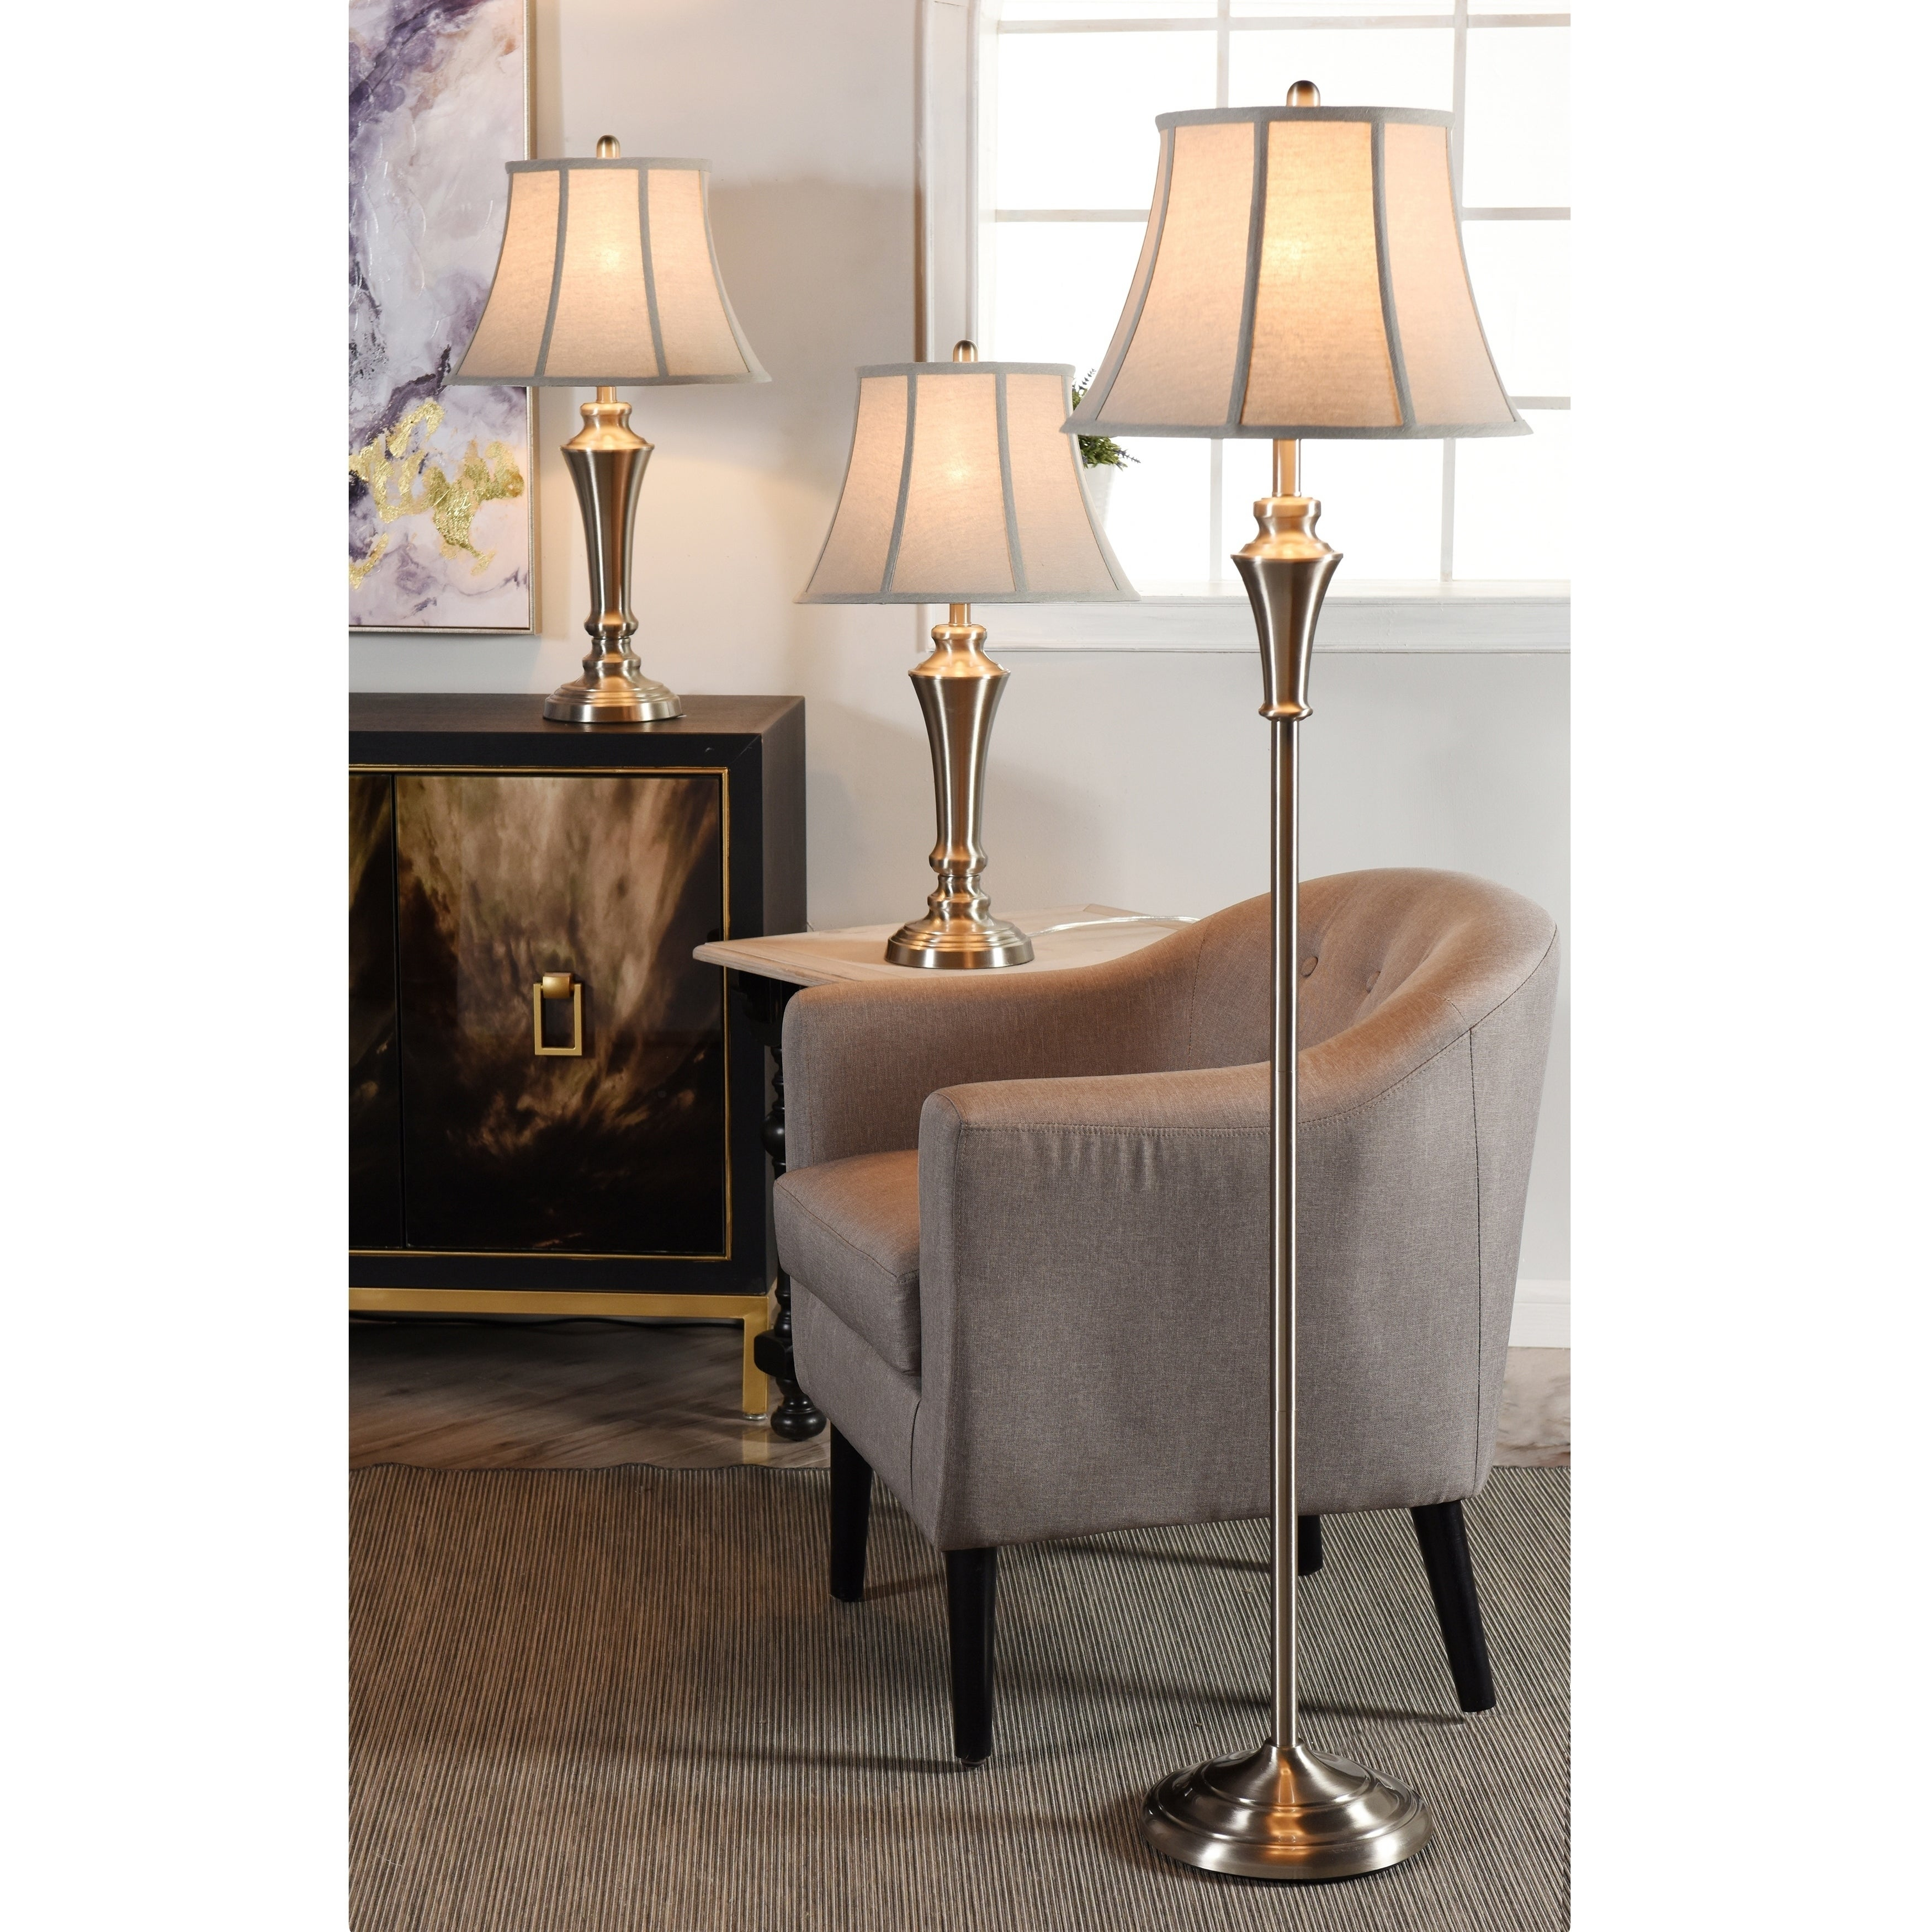 3 Piece Brushed Nickel Floor And Table Lamp Set Geneva Taupe Fabric Shade intended for dimensions 3500 X 3500